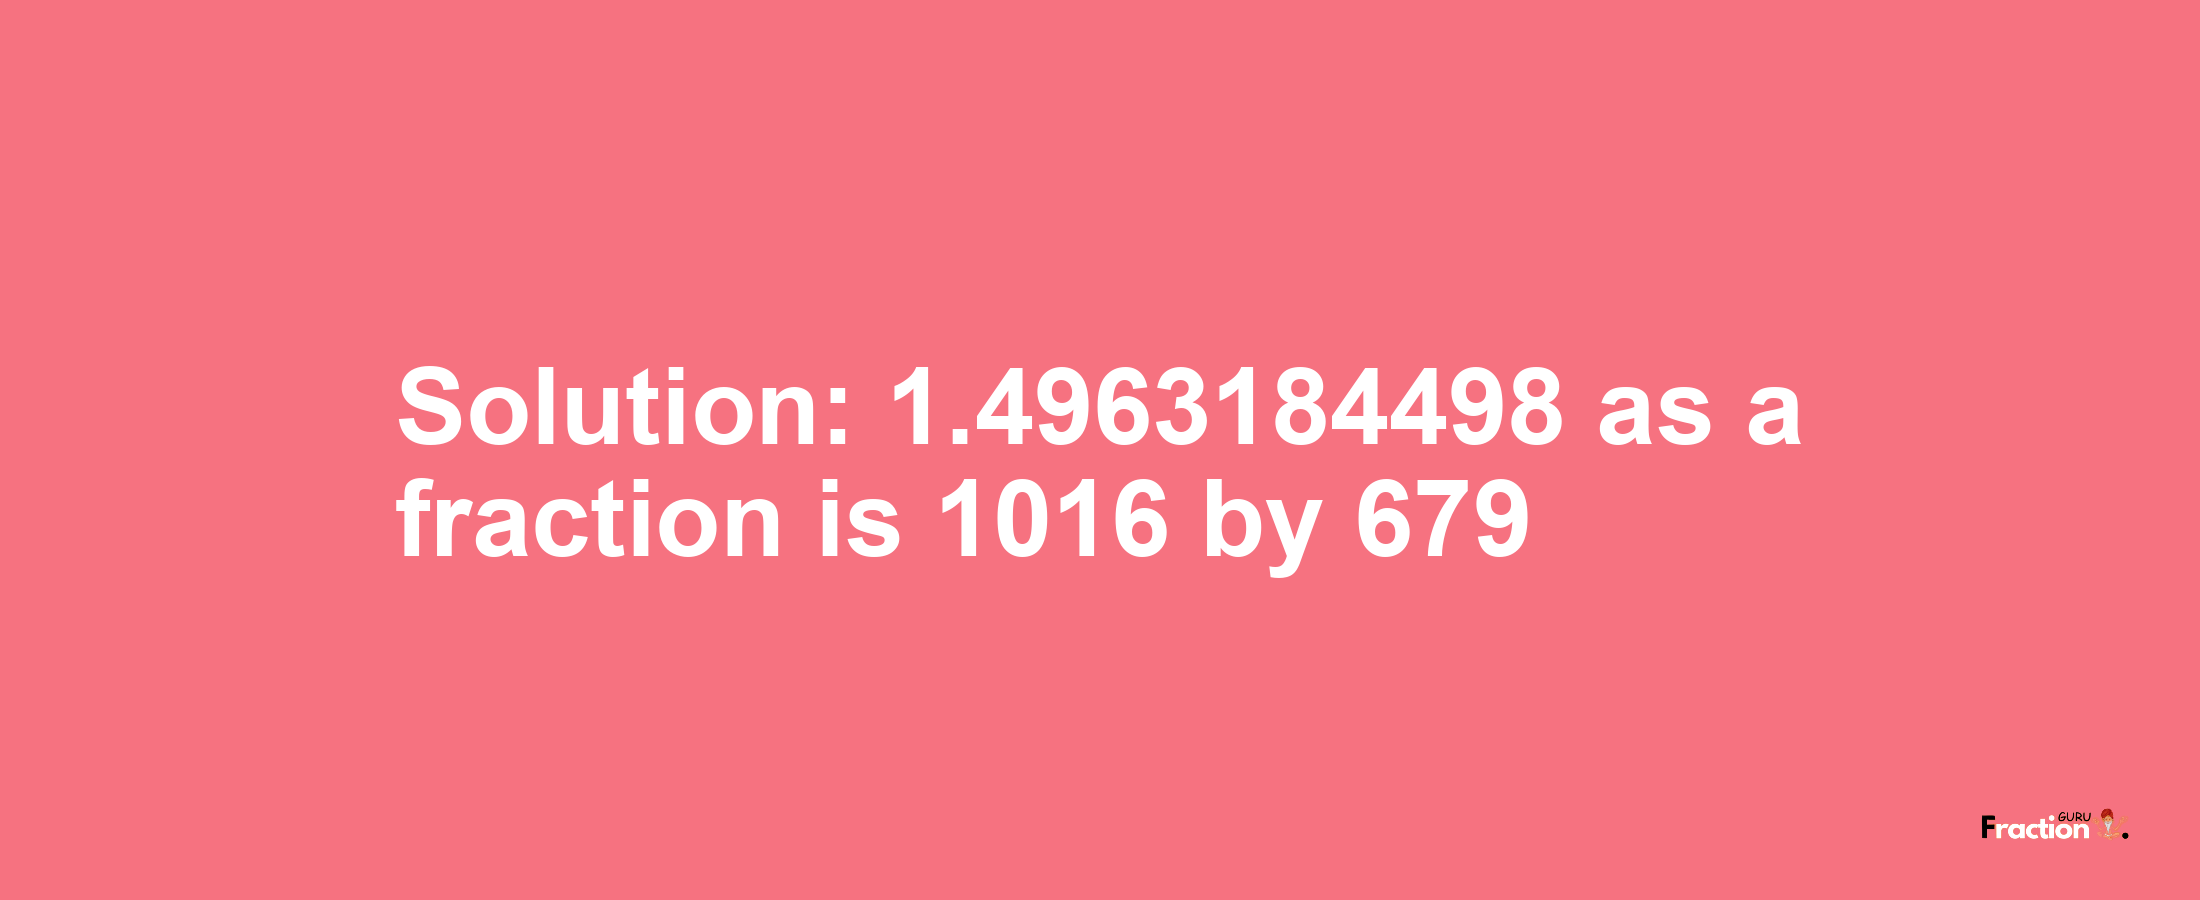 Solution:1.4963184498 as a fraction is 1016/679